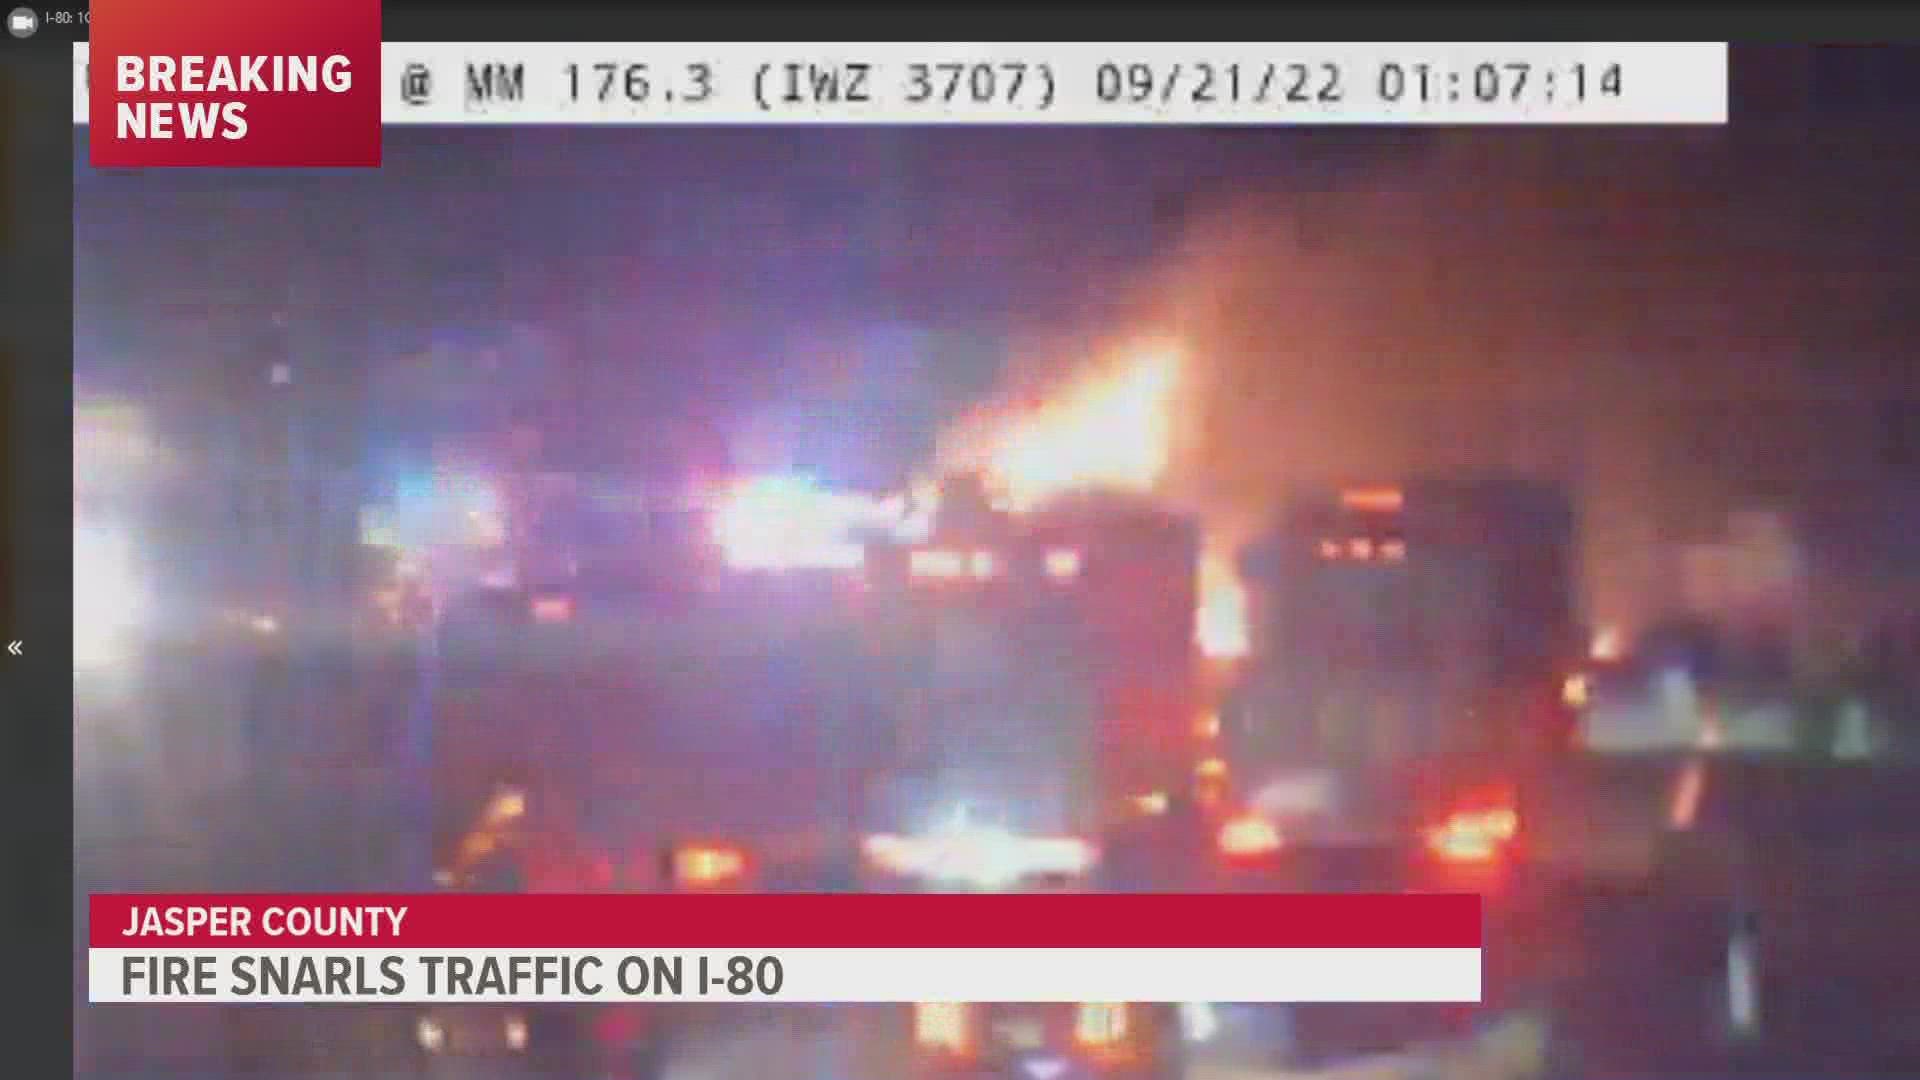 The fire in Jasper County, captured here via the Iowa DOT camera, significantly backed up traffic overnight.